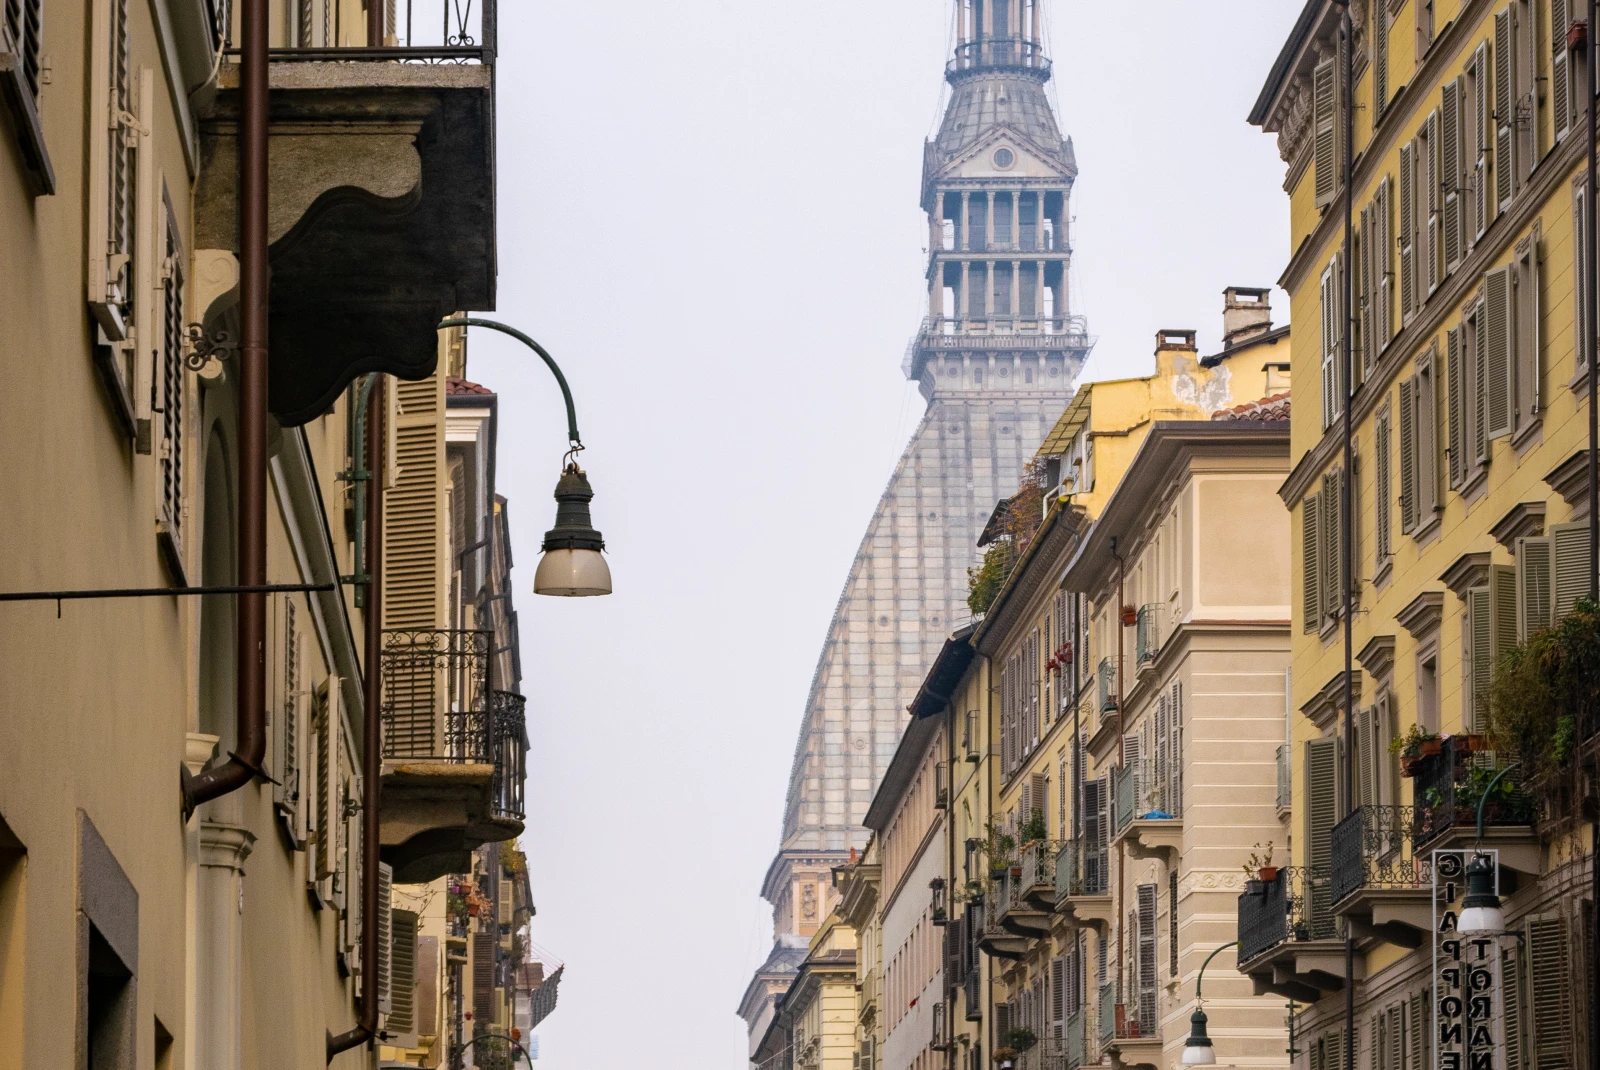 The streets of Torino, Italy with Mole antonelliana in the background